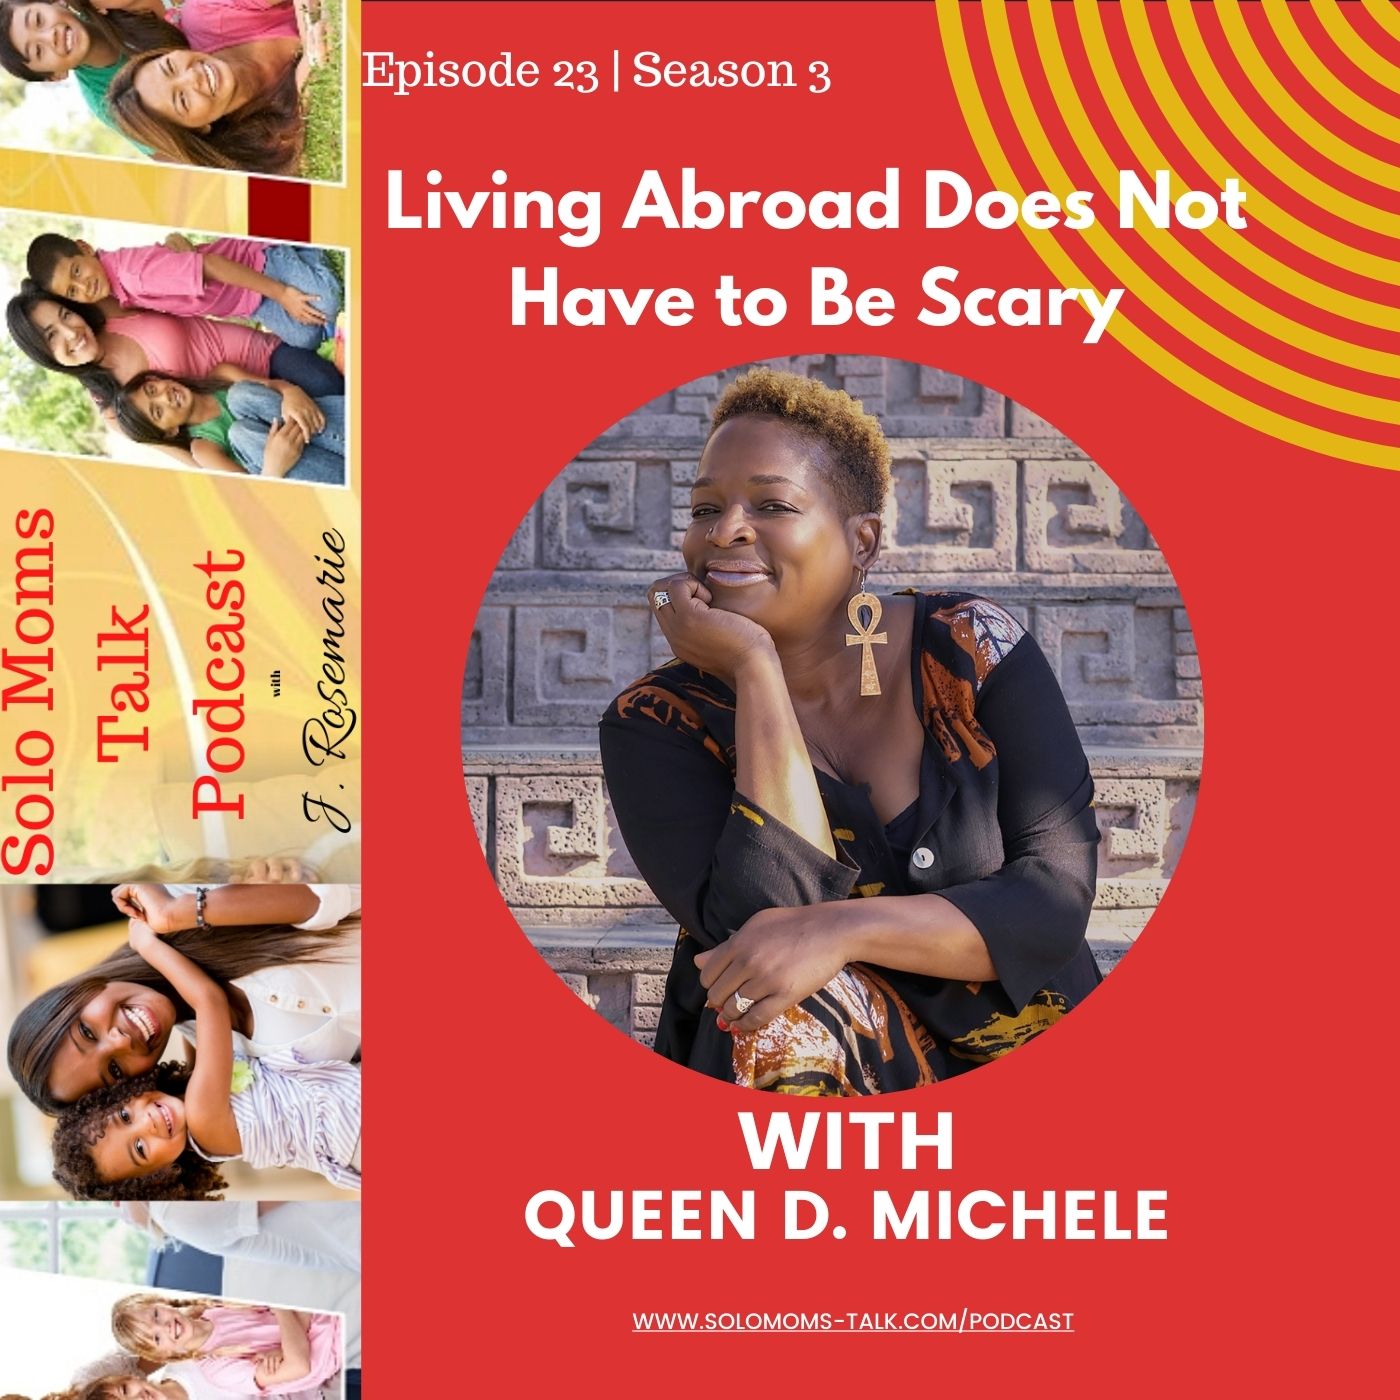 Moving Abroad: A Path to Purpose w/Queen D. Michele